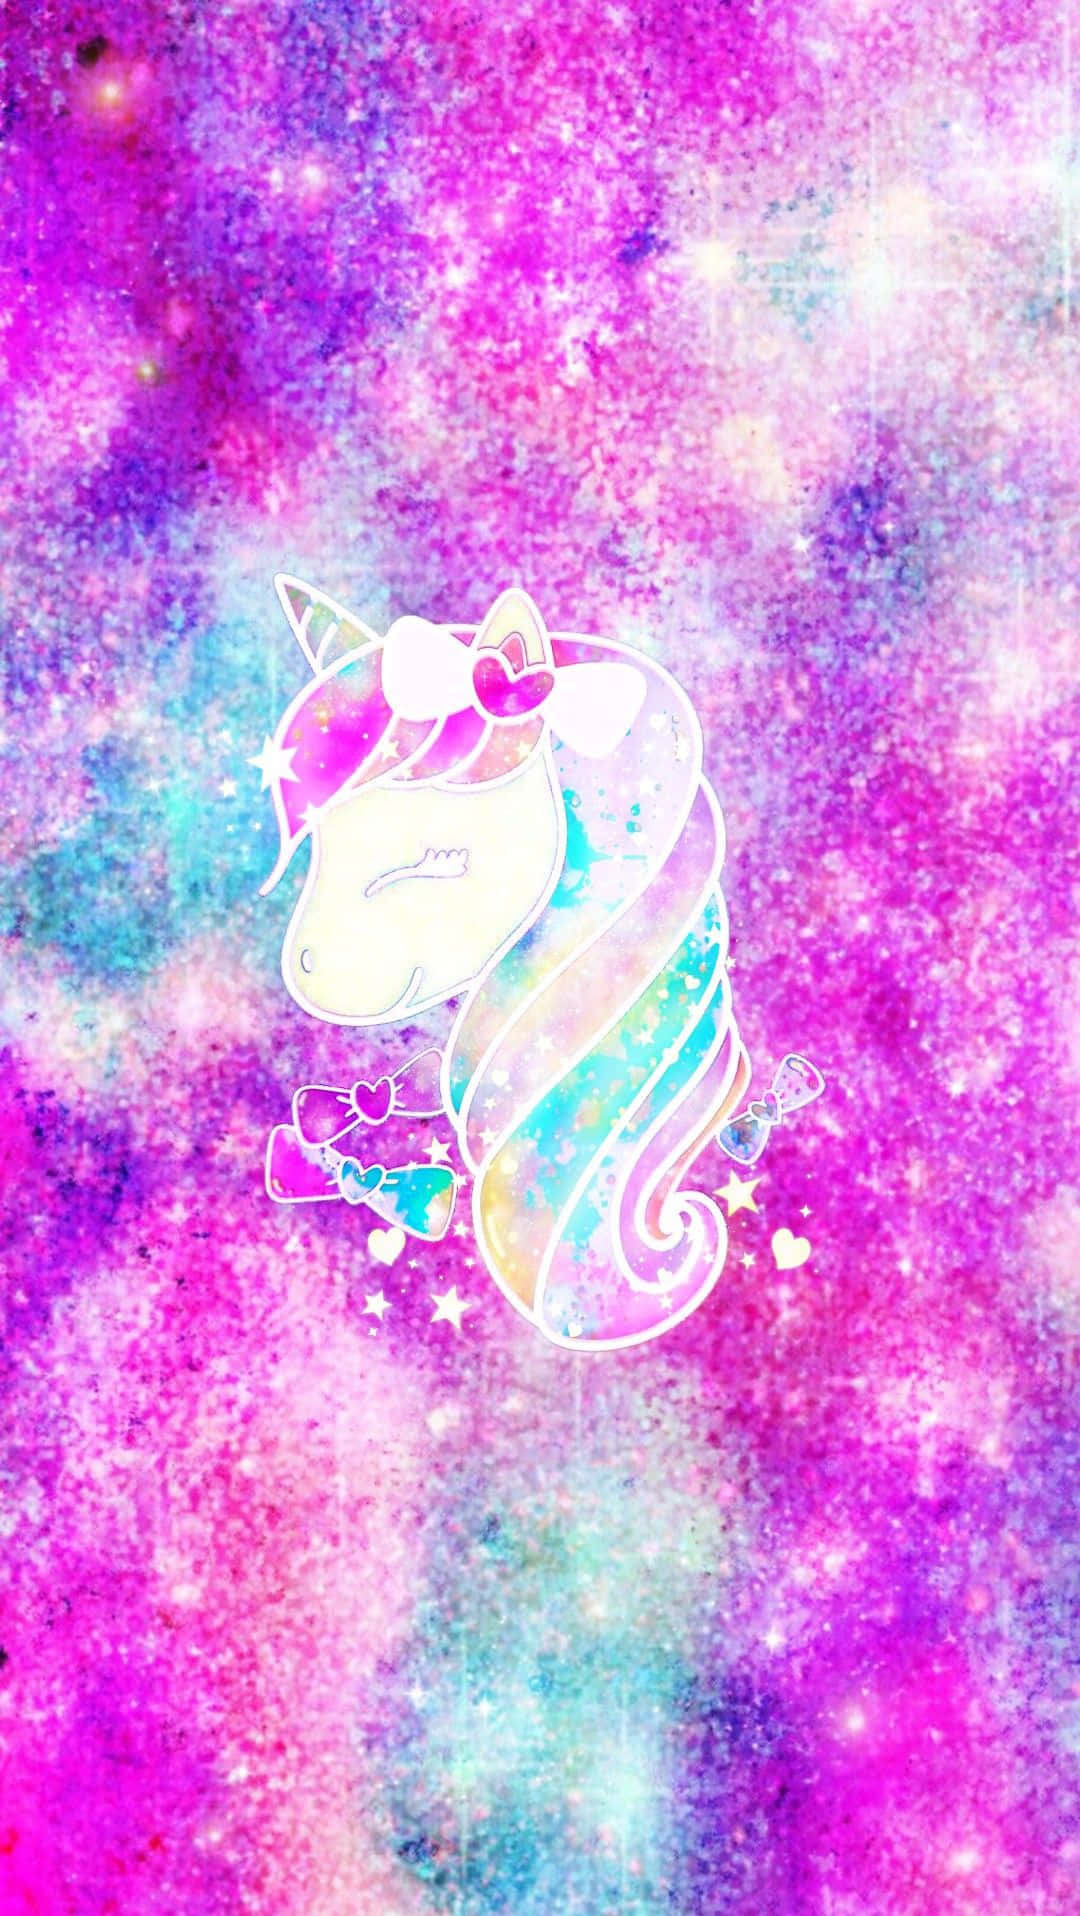 Download unicorn wallpapers for iphone | Wallpapers.com